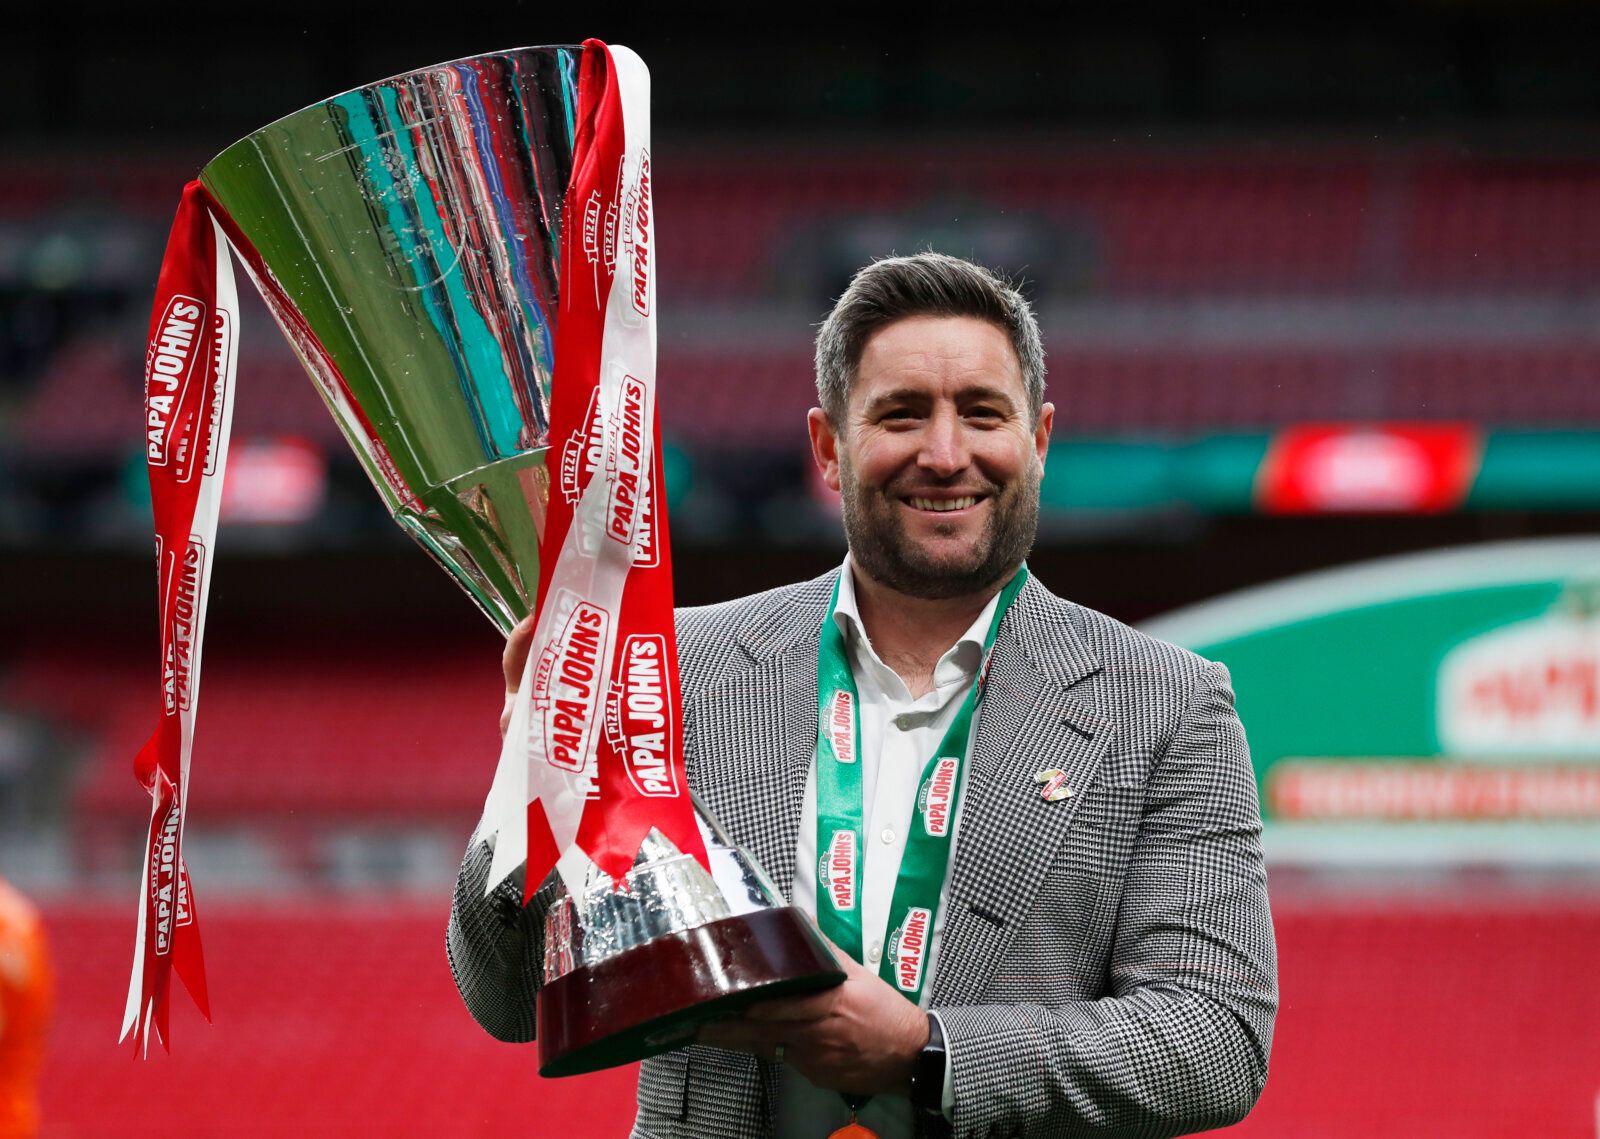 Soccer Football - EFL Trophy Final - Sunderland v Tranmere Rovers - Wembley Stadium, London, Britain - March 14, 2021 Sunderland manager Lee Johnson celebrates with the EFL Trophy after the match Action Images/Lee Smith EDITORIAL USE ONLY. No use with unauthorized audio, video, data, fixture lists, club/league logos or 'live' services. Online in-match use limited to 75 images, no video emulation. No use in betting, games or single club /league/player publications.  Please contact your account re